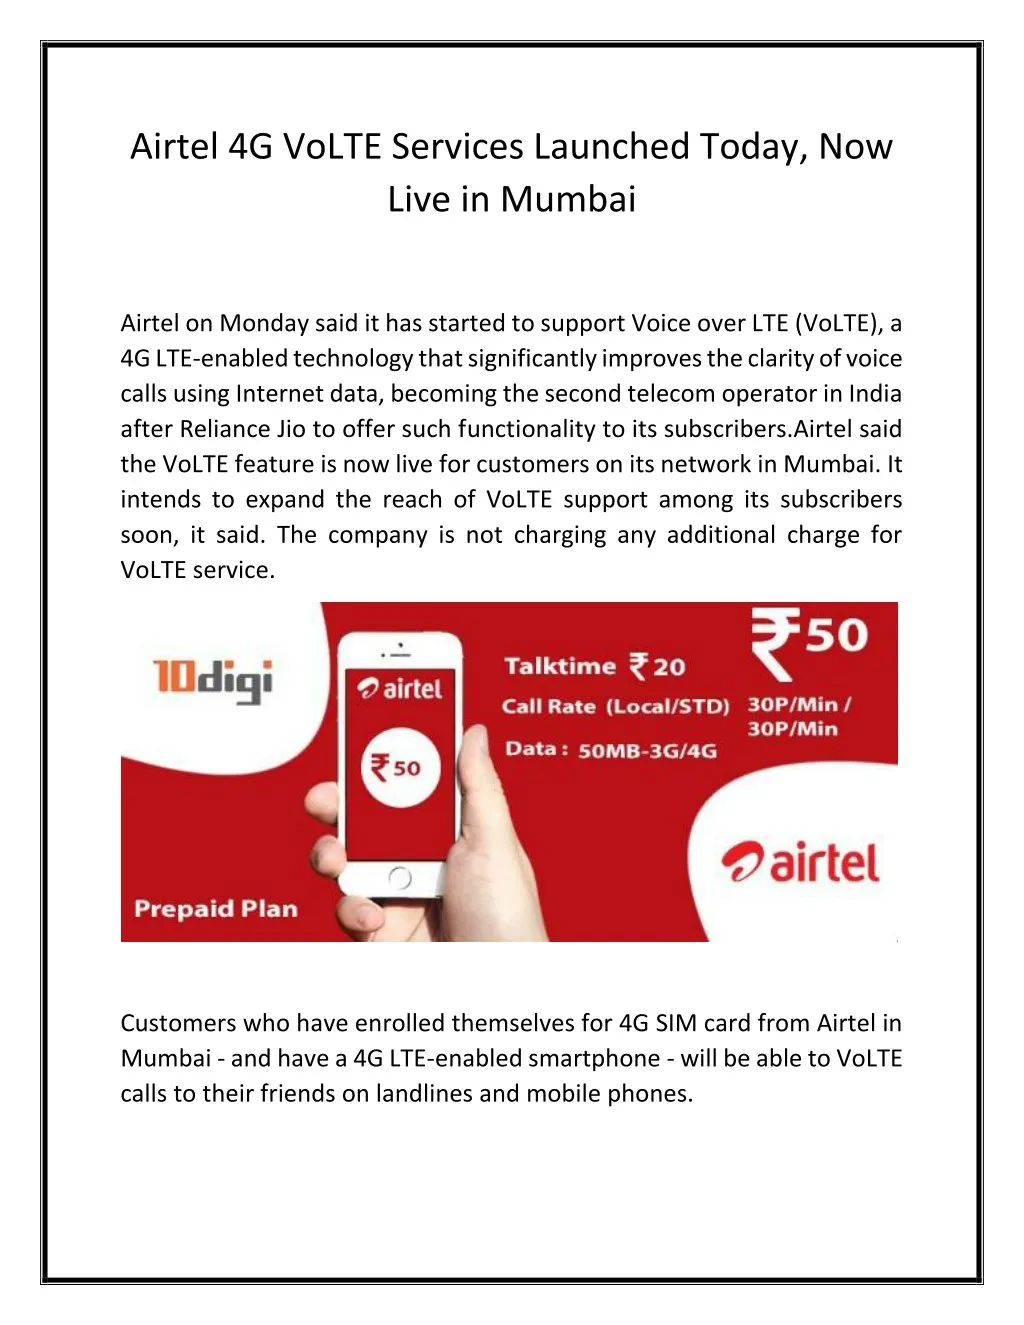 airtel 4g volte services launched today now live